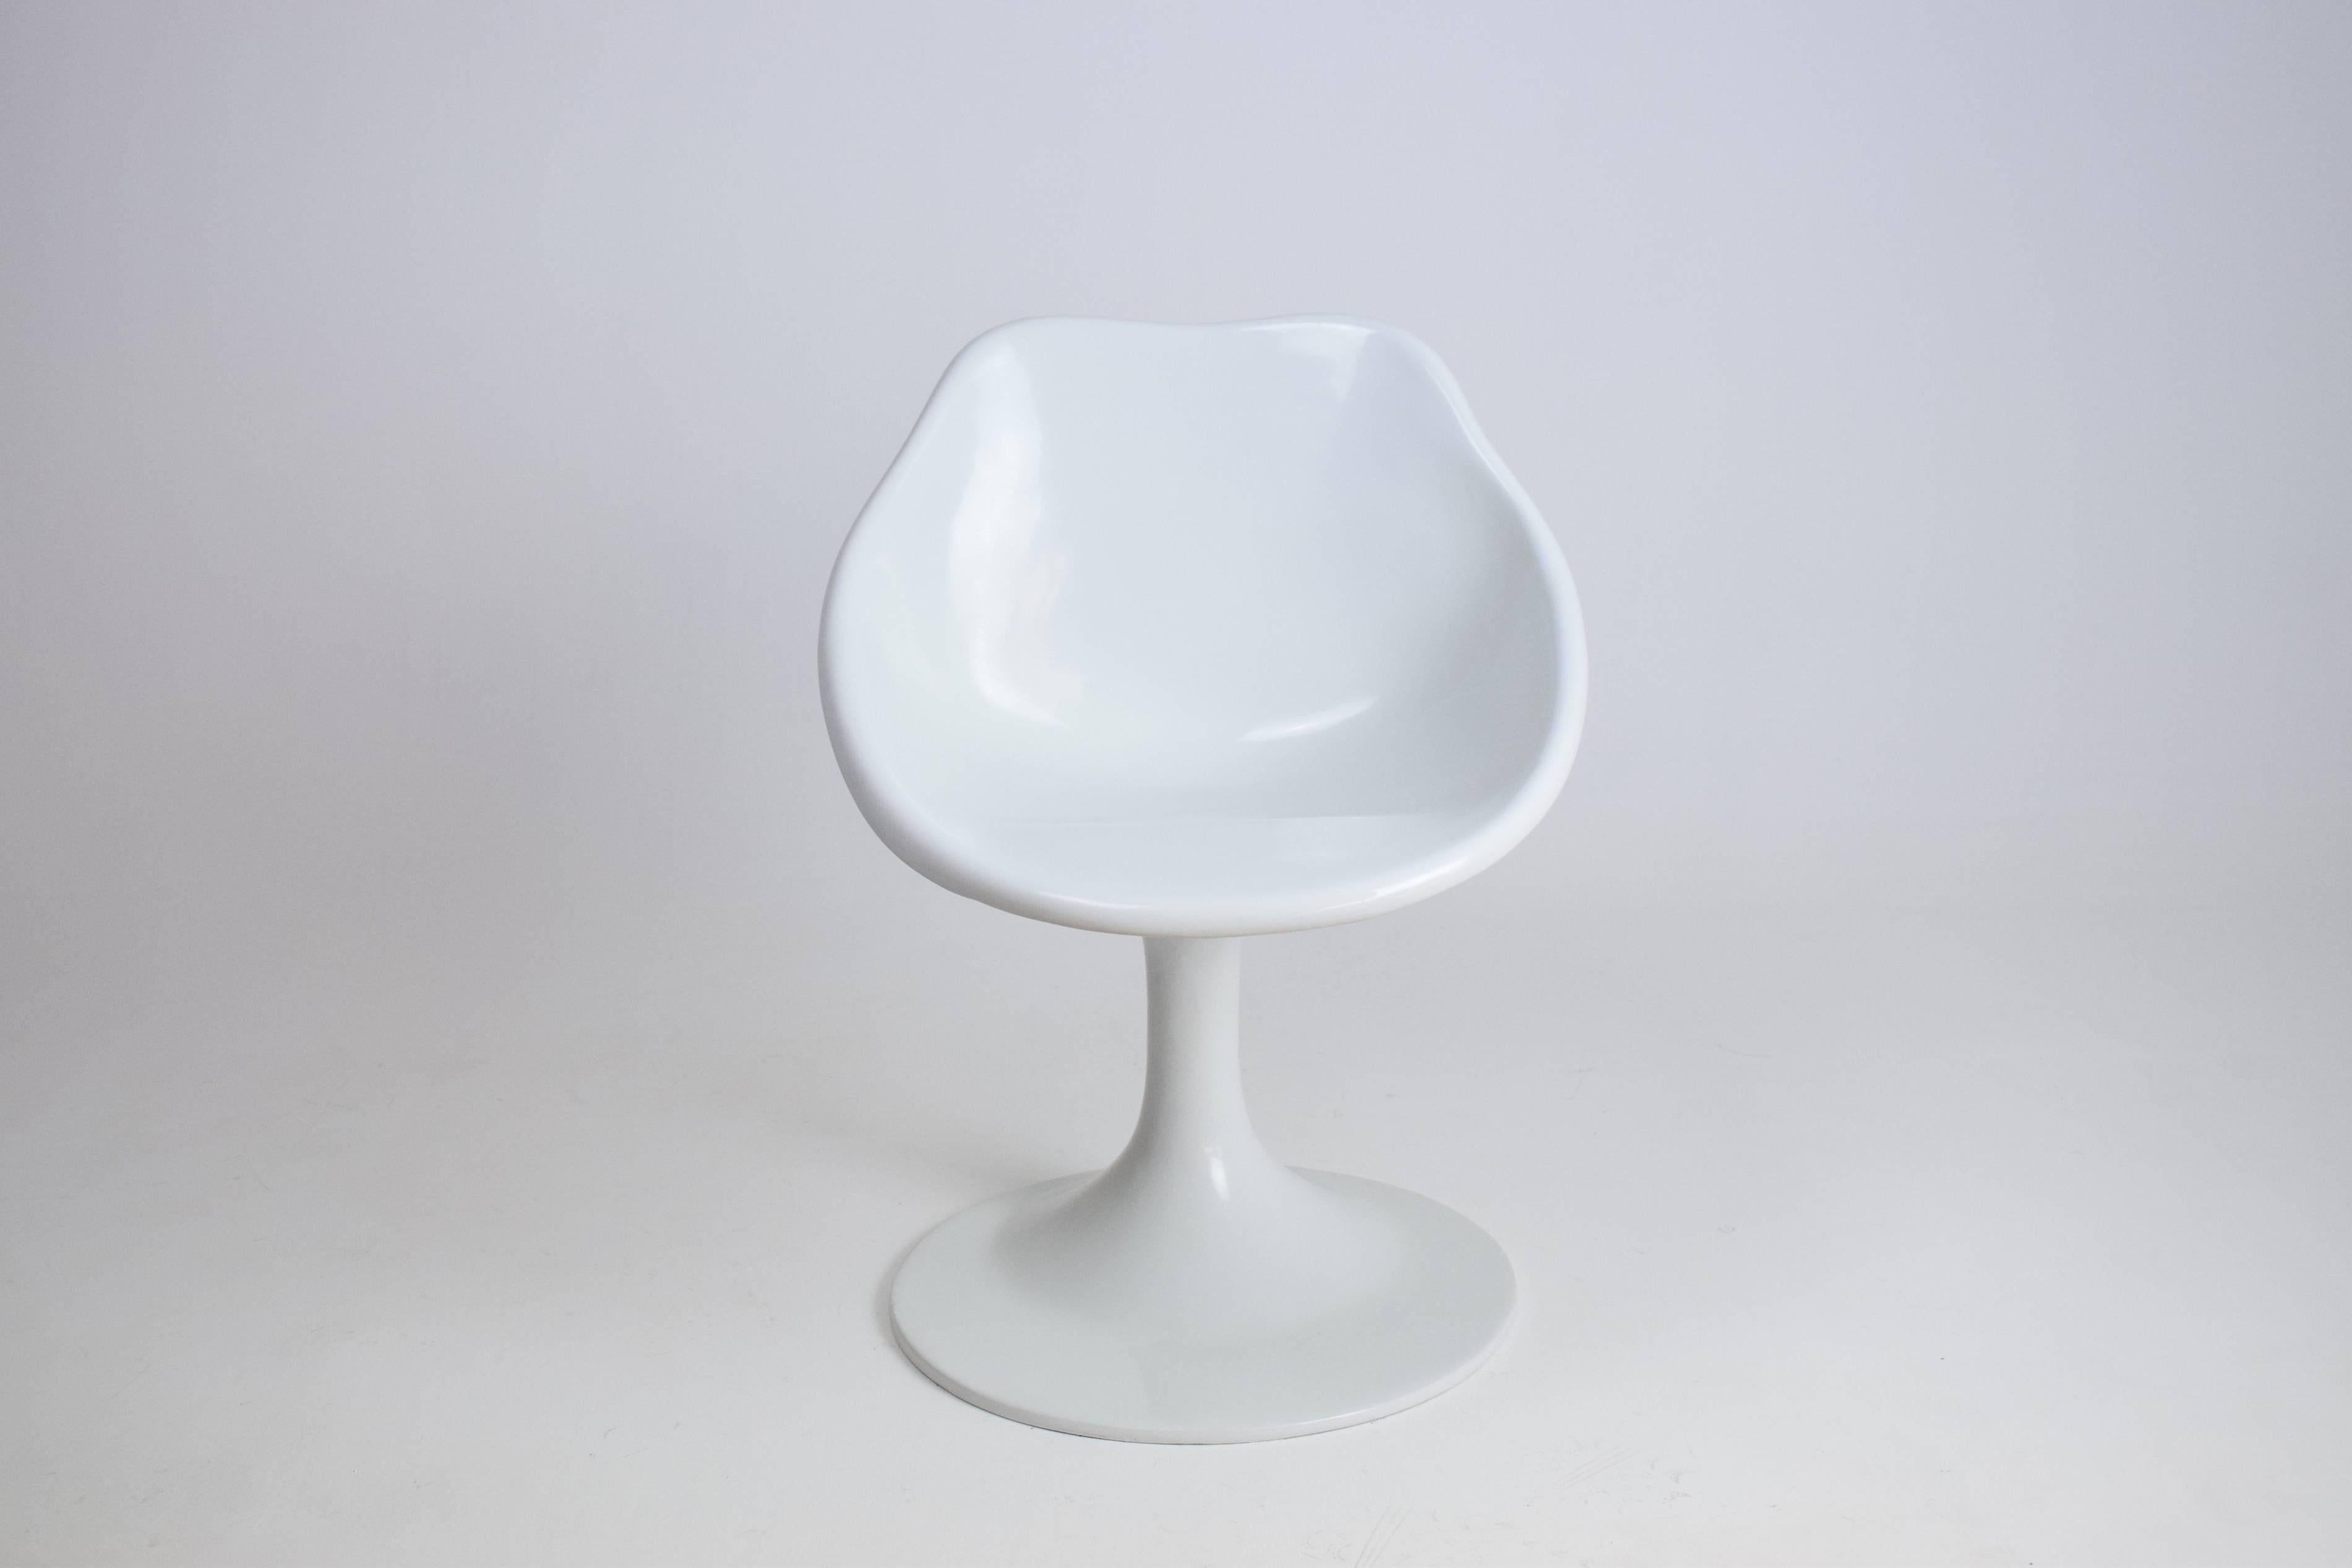 20th century vintage white fiberglass chair of space age design with futuristic curves.
In the style of the Orbit chair by Walter Grunder and Markus Farner.

Fully restored, excellent vintage condition.

-------

We are an exhibition space and an